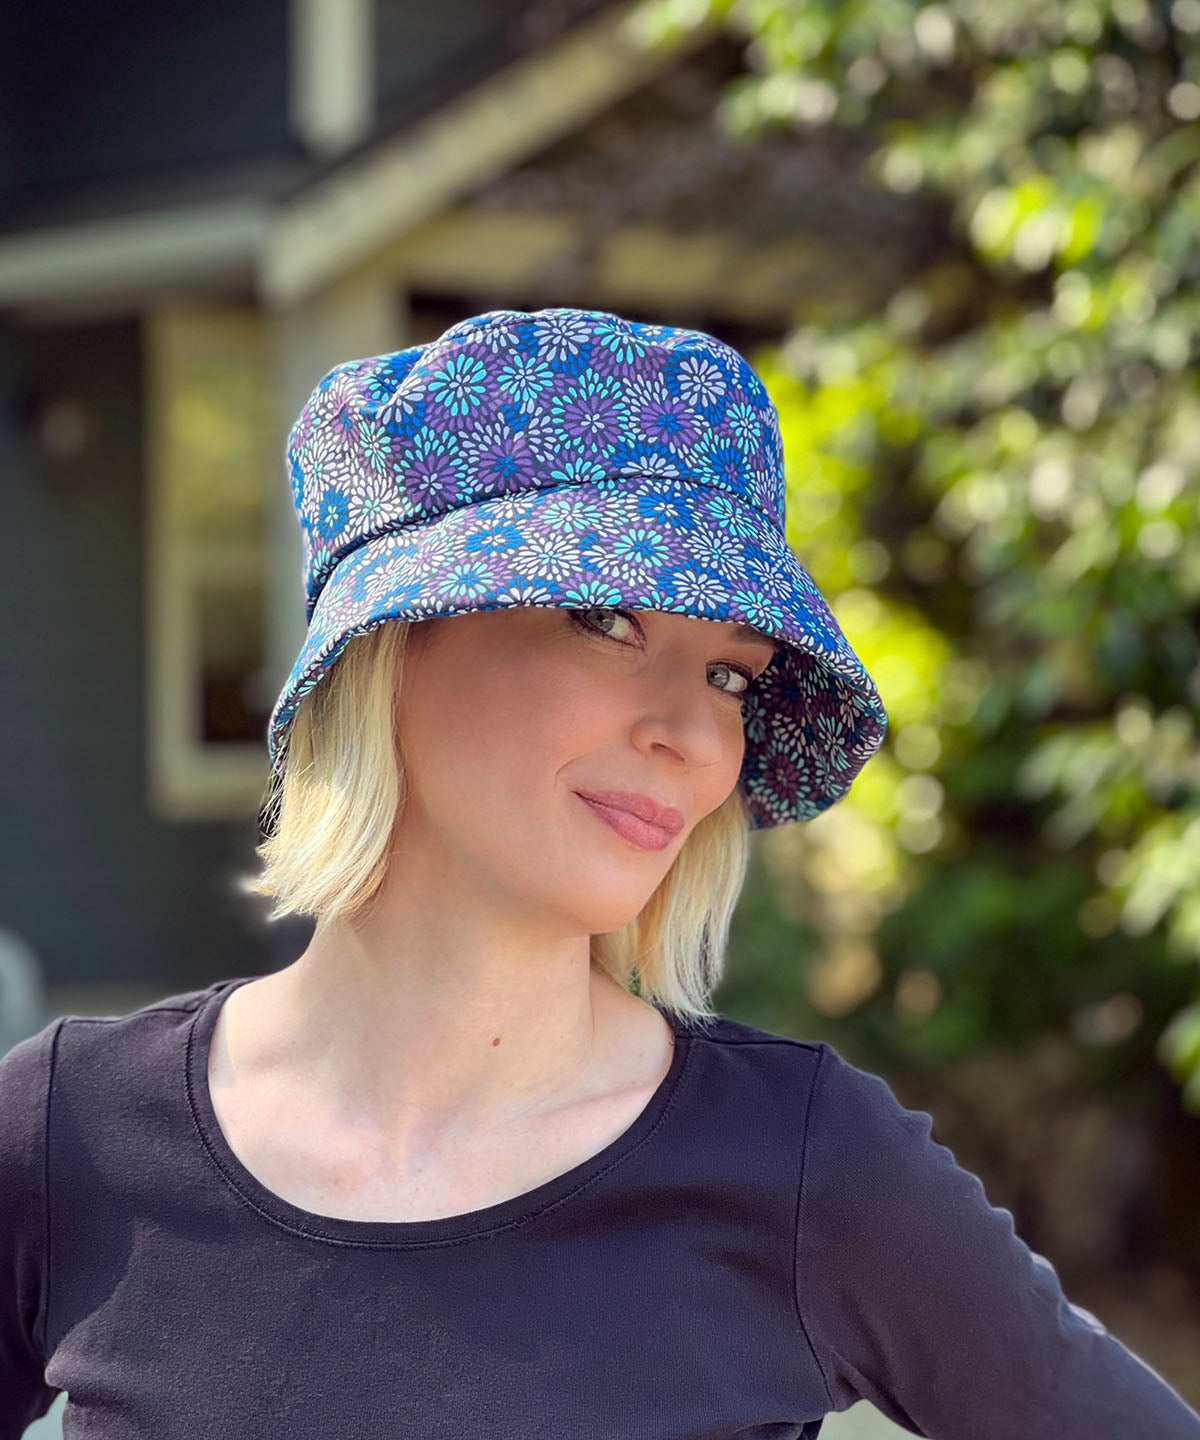 Molly Bucket Style Hat in Blue and Purple Floral Blossom Cotton | Handmade By Pandemonium Millinery in Seattle WA